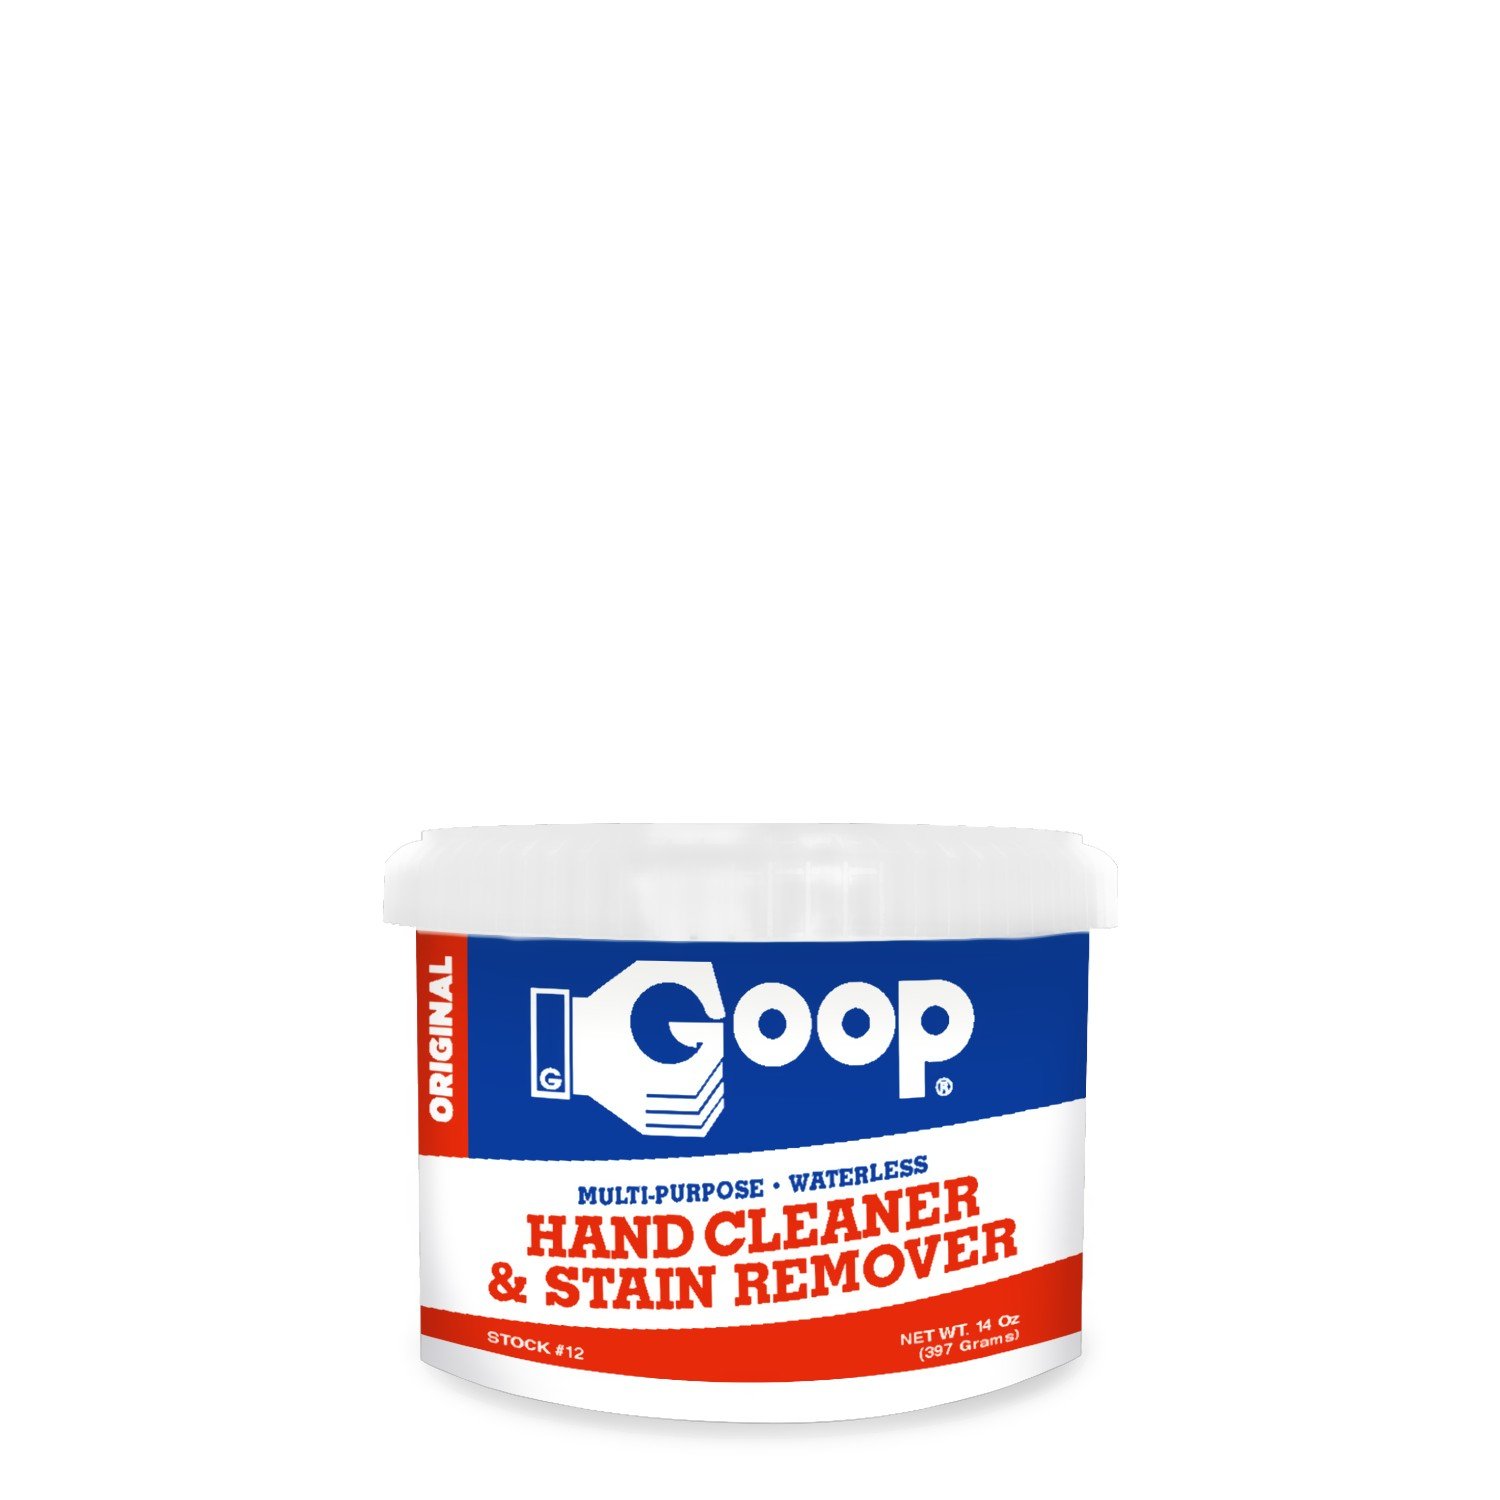 GOOP Multi-Purpose Hand Cleaner and Stain Remover, 14 oz container 